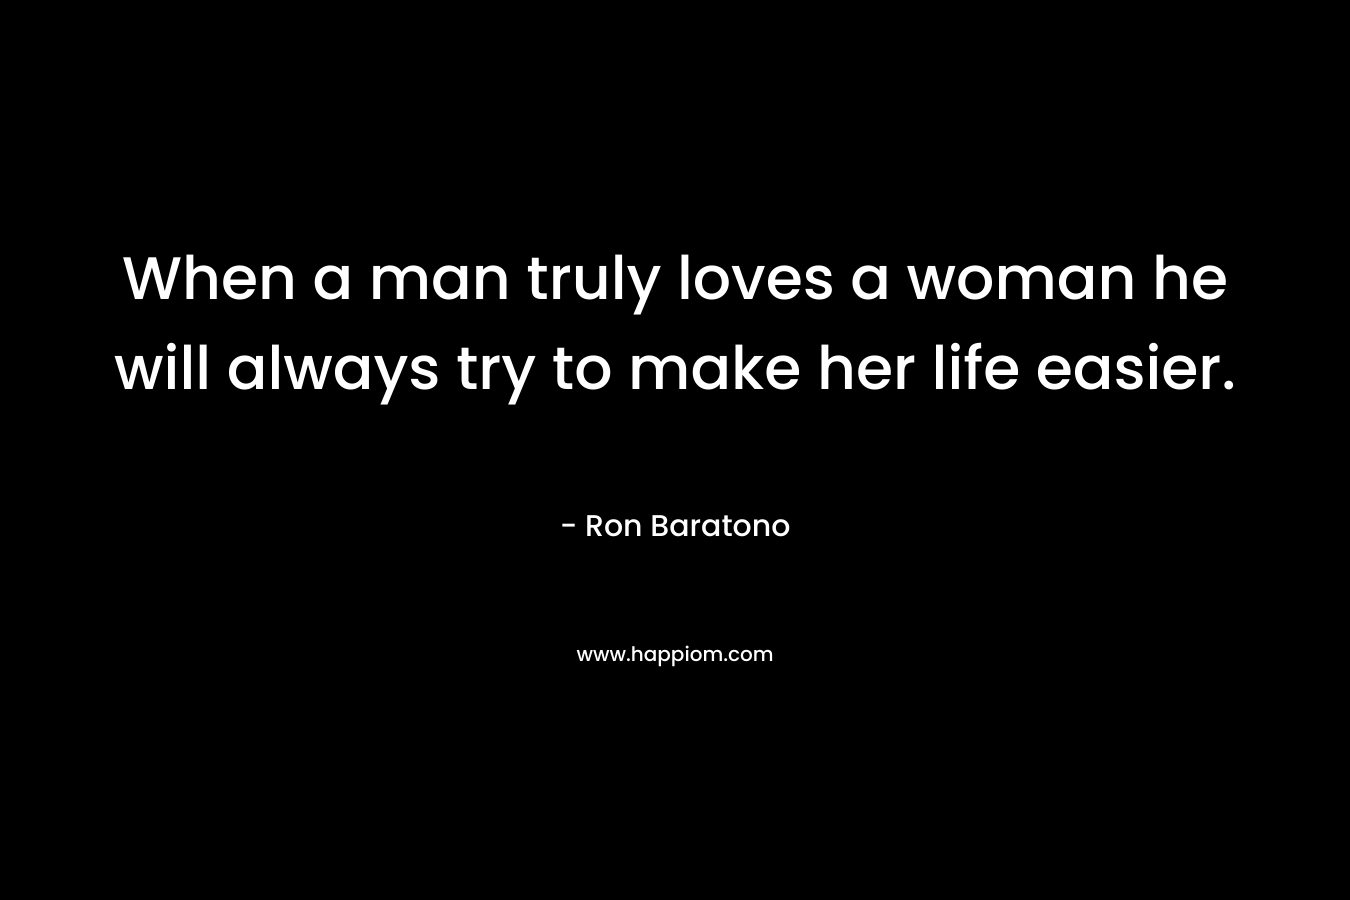 When a man truly loves a woman he will always try to make her life easier. – Ron Baratono